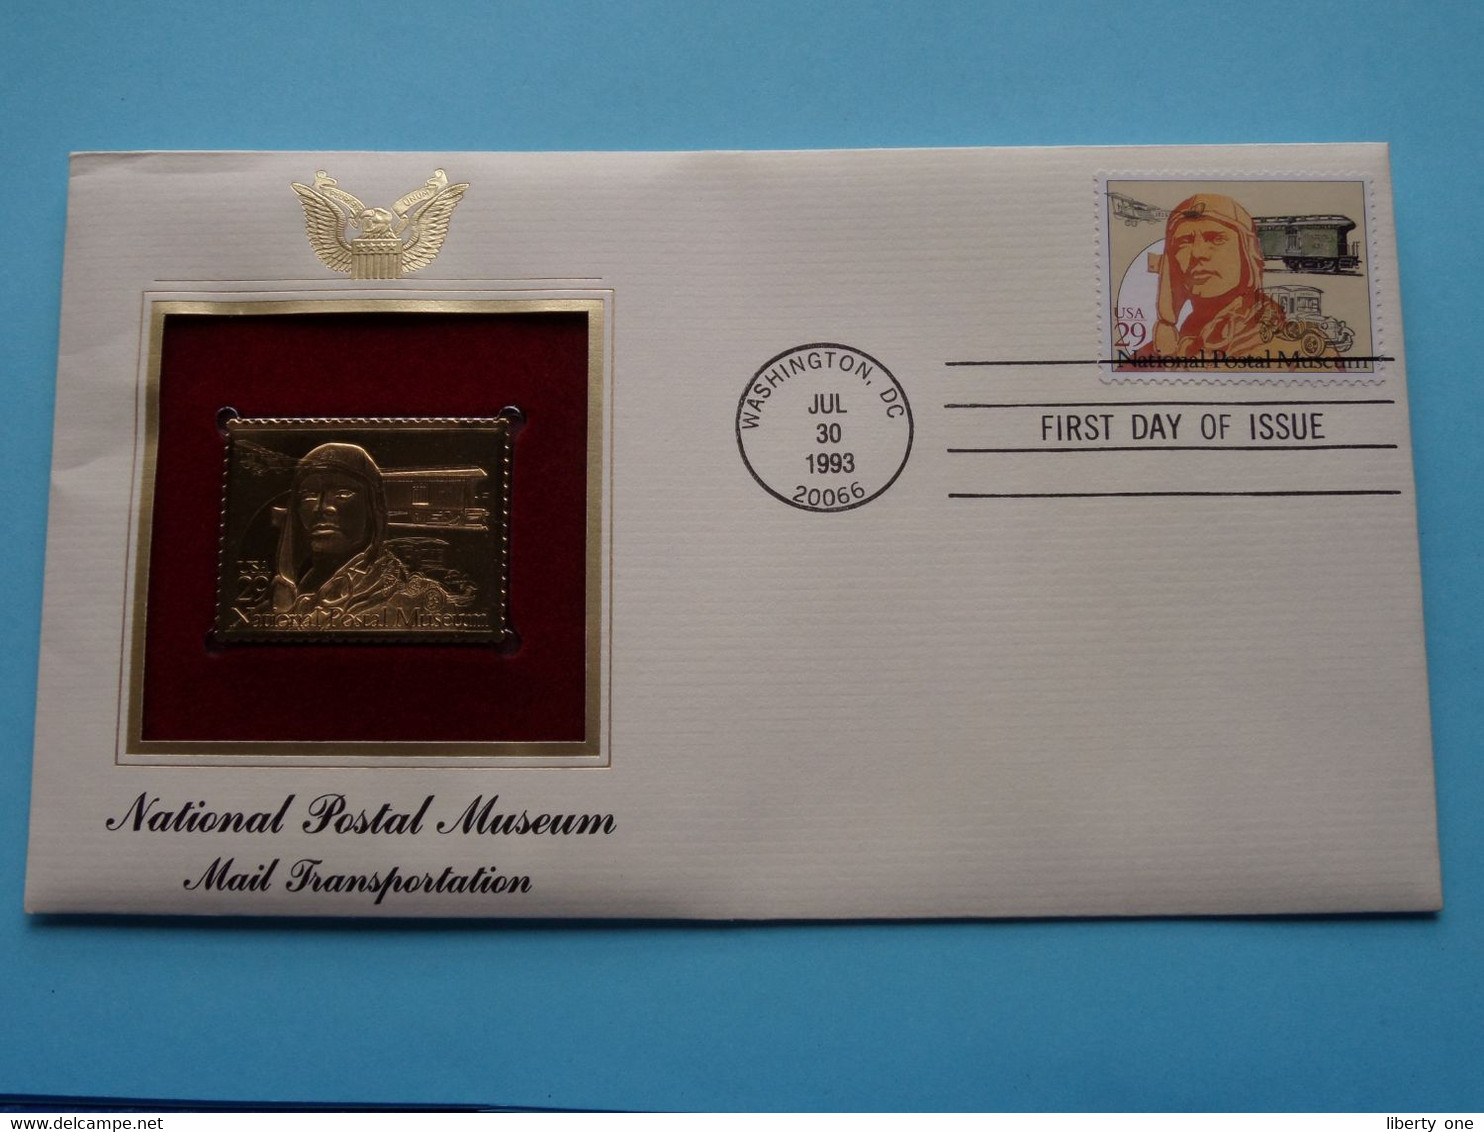 NATIONAL POSTAL MUSEUM - MAIL TRANSPORTATION ( 22kt Gold Stamp Replica ) First Day Of Issue 1993 > USA ! - 1991-2000